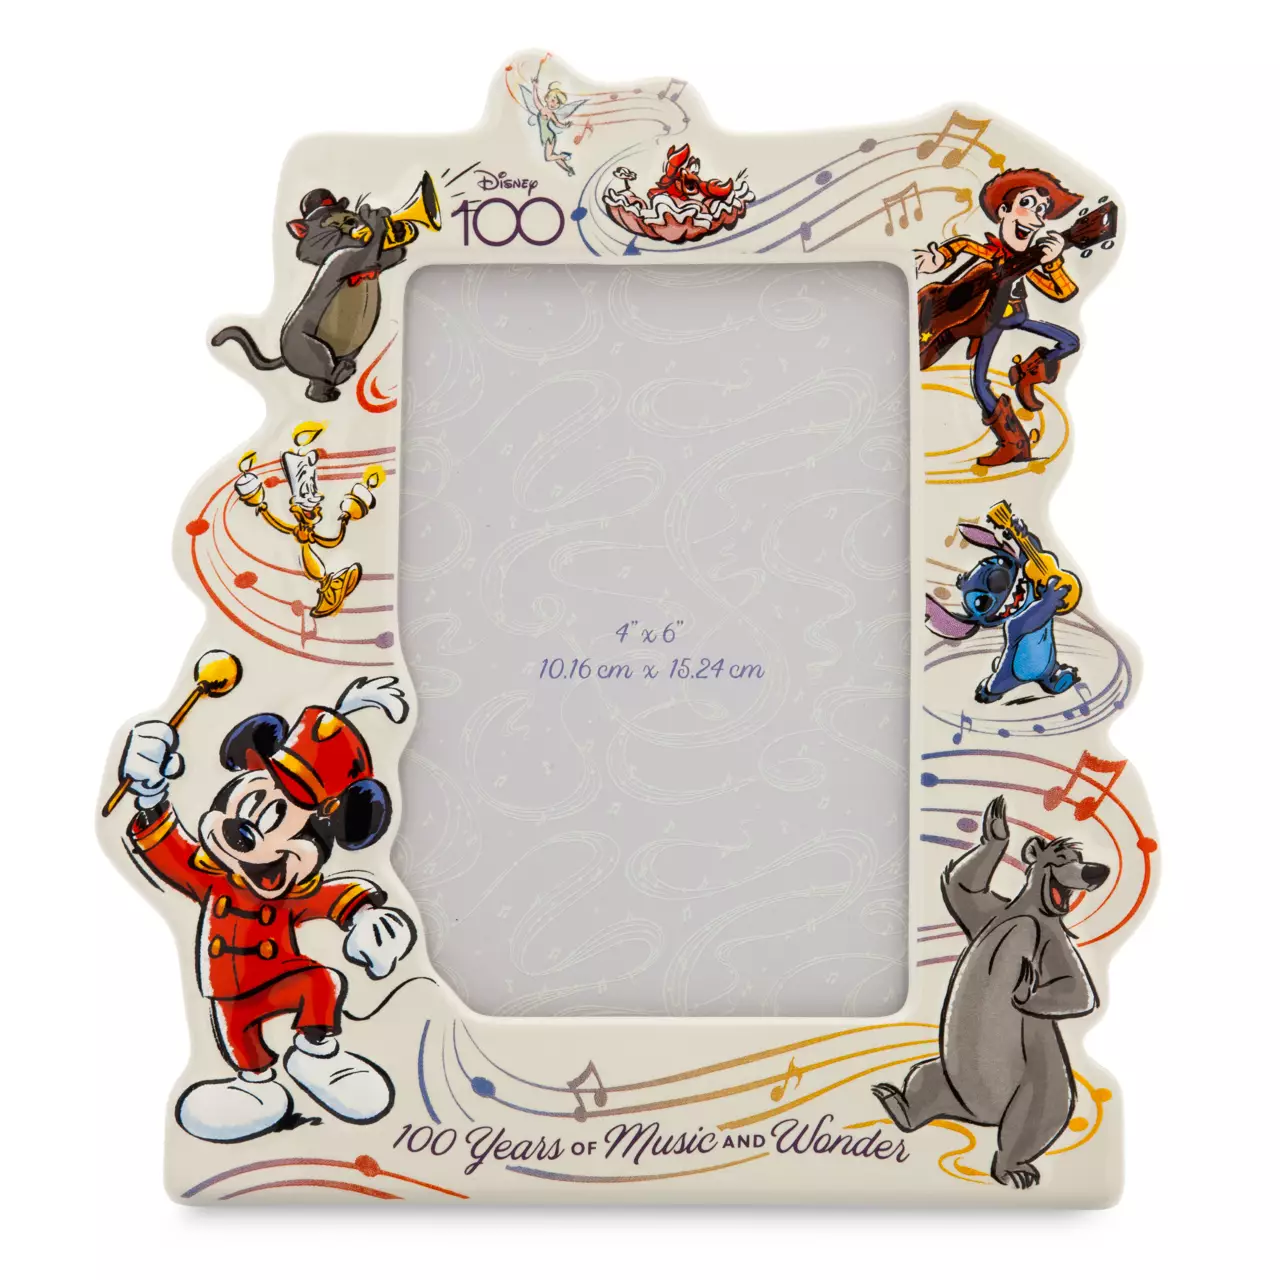 Mickey Mouse and Friends Photo Frame – Disney100 Special Moments